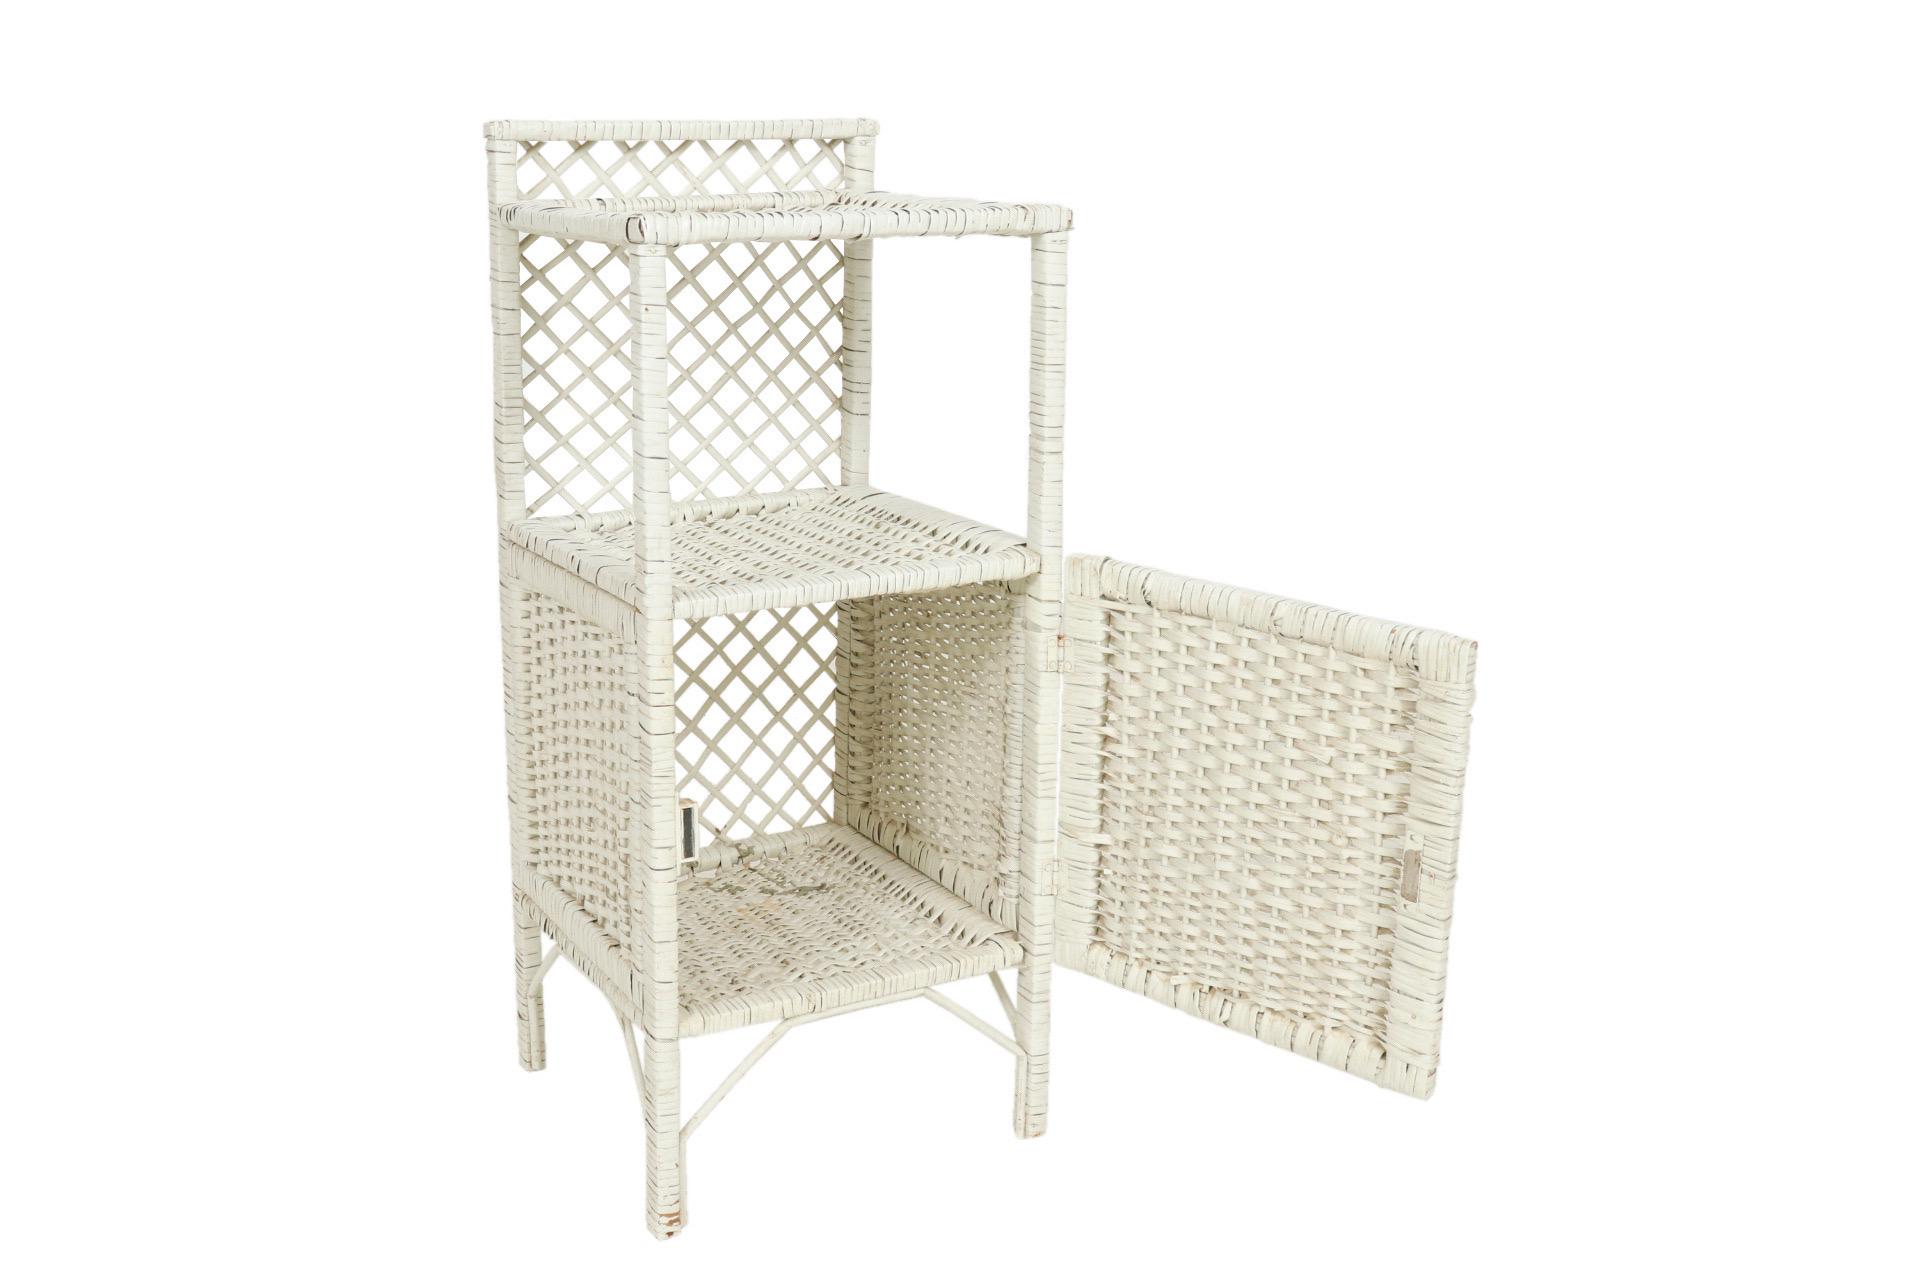 A small white cabinet made of wicker woven rattan. A single cabinet opens with a round wooden bead handle. Above is a single square shelf. The back is decorated with an open lattice weave.
 